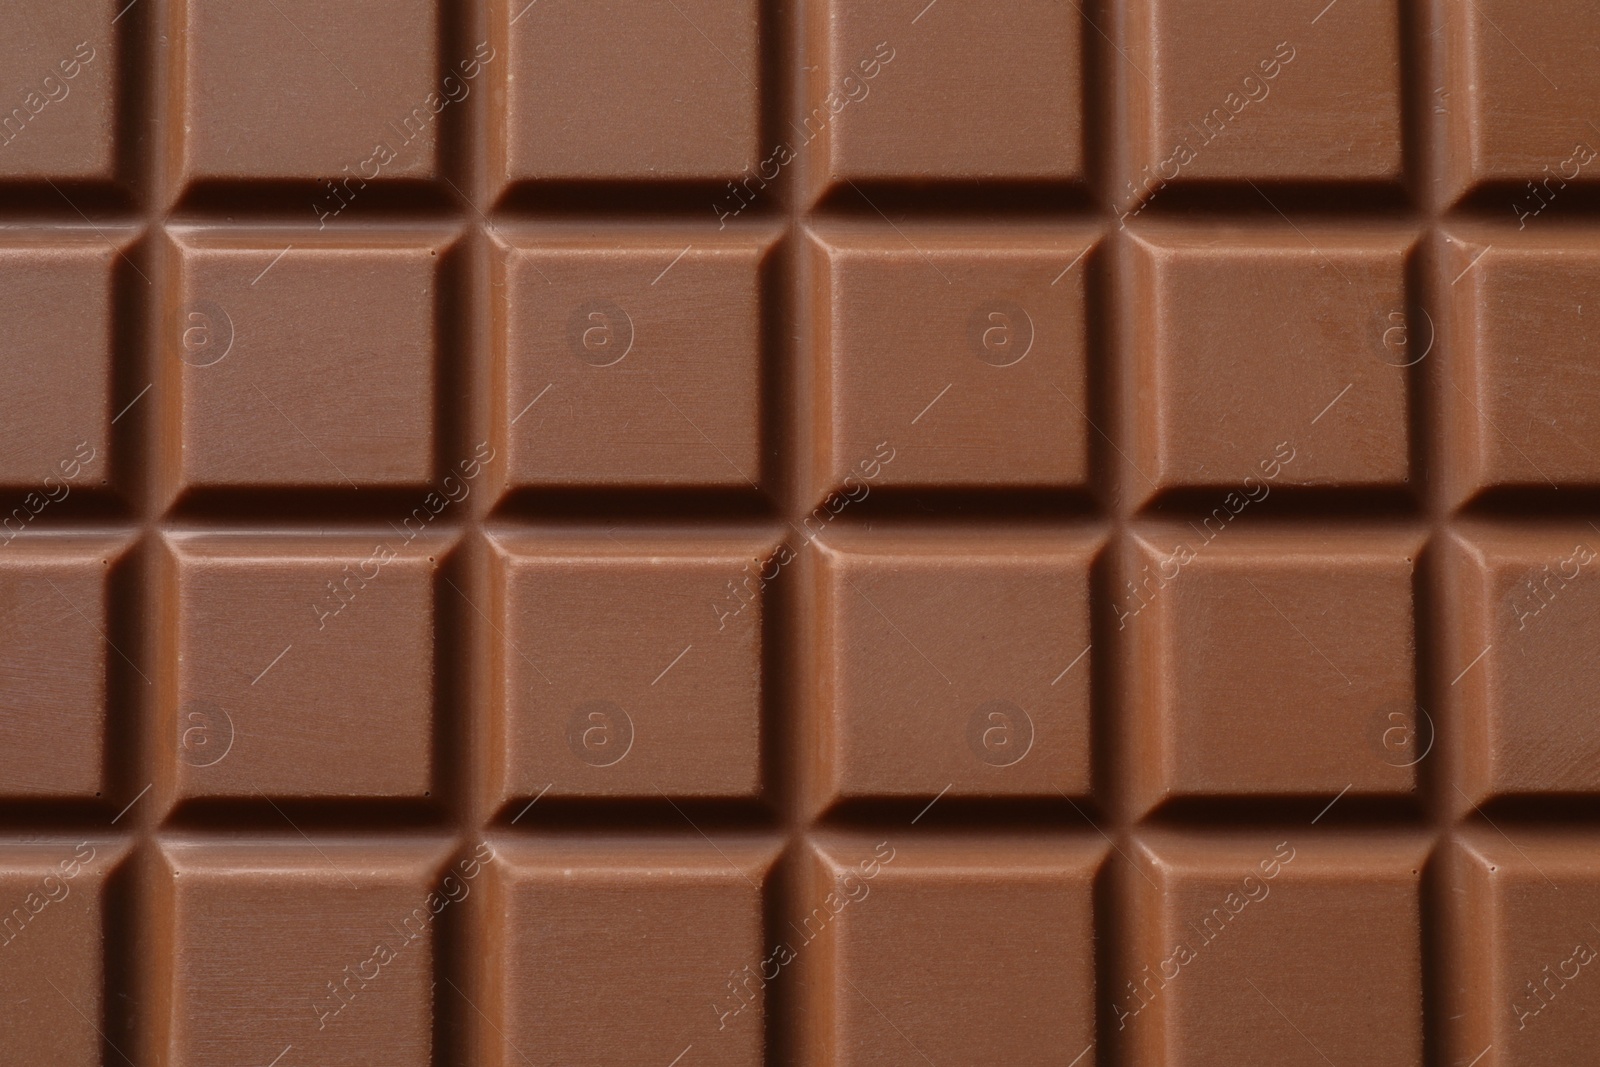 Photo of Delicious milk chocolate bar as background, top view